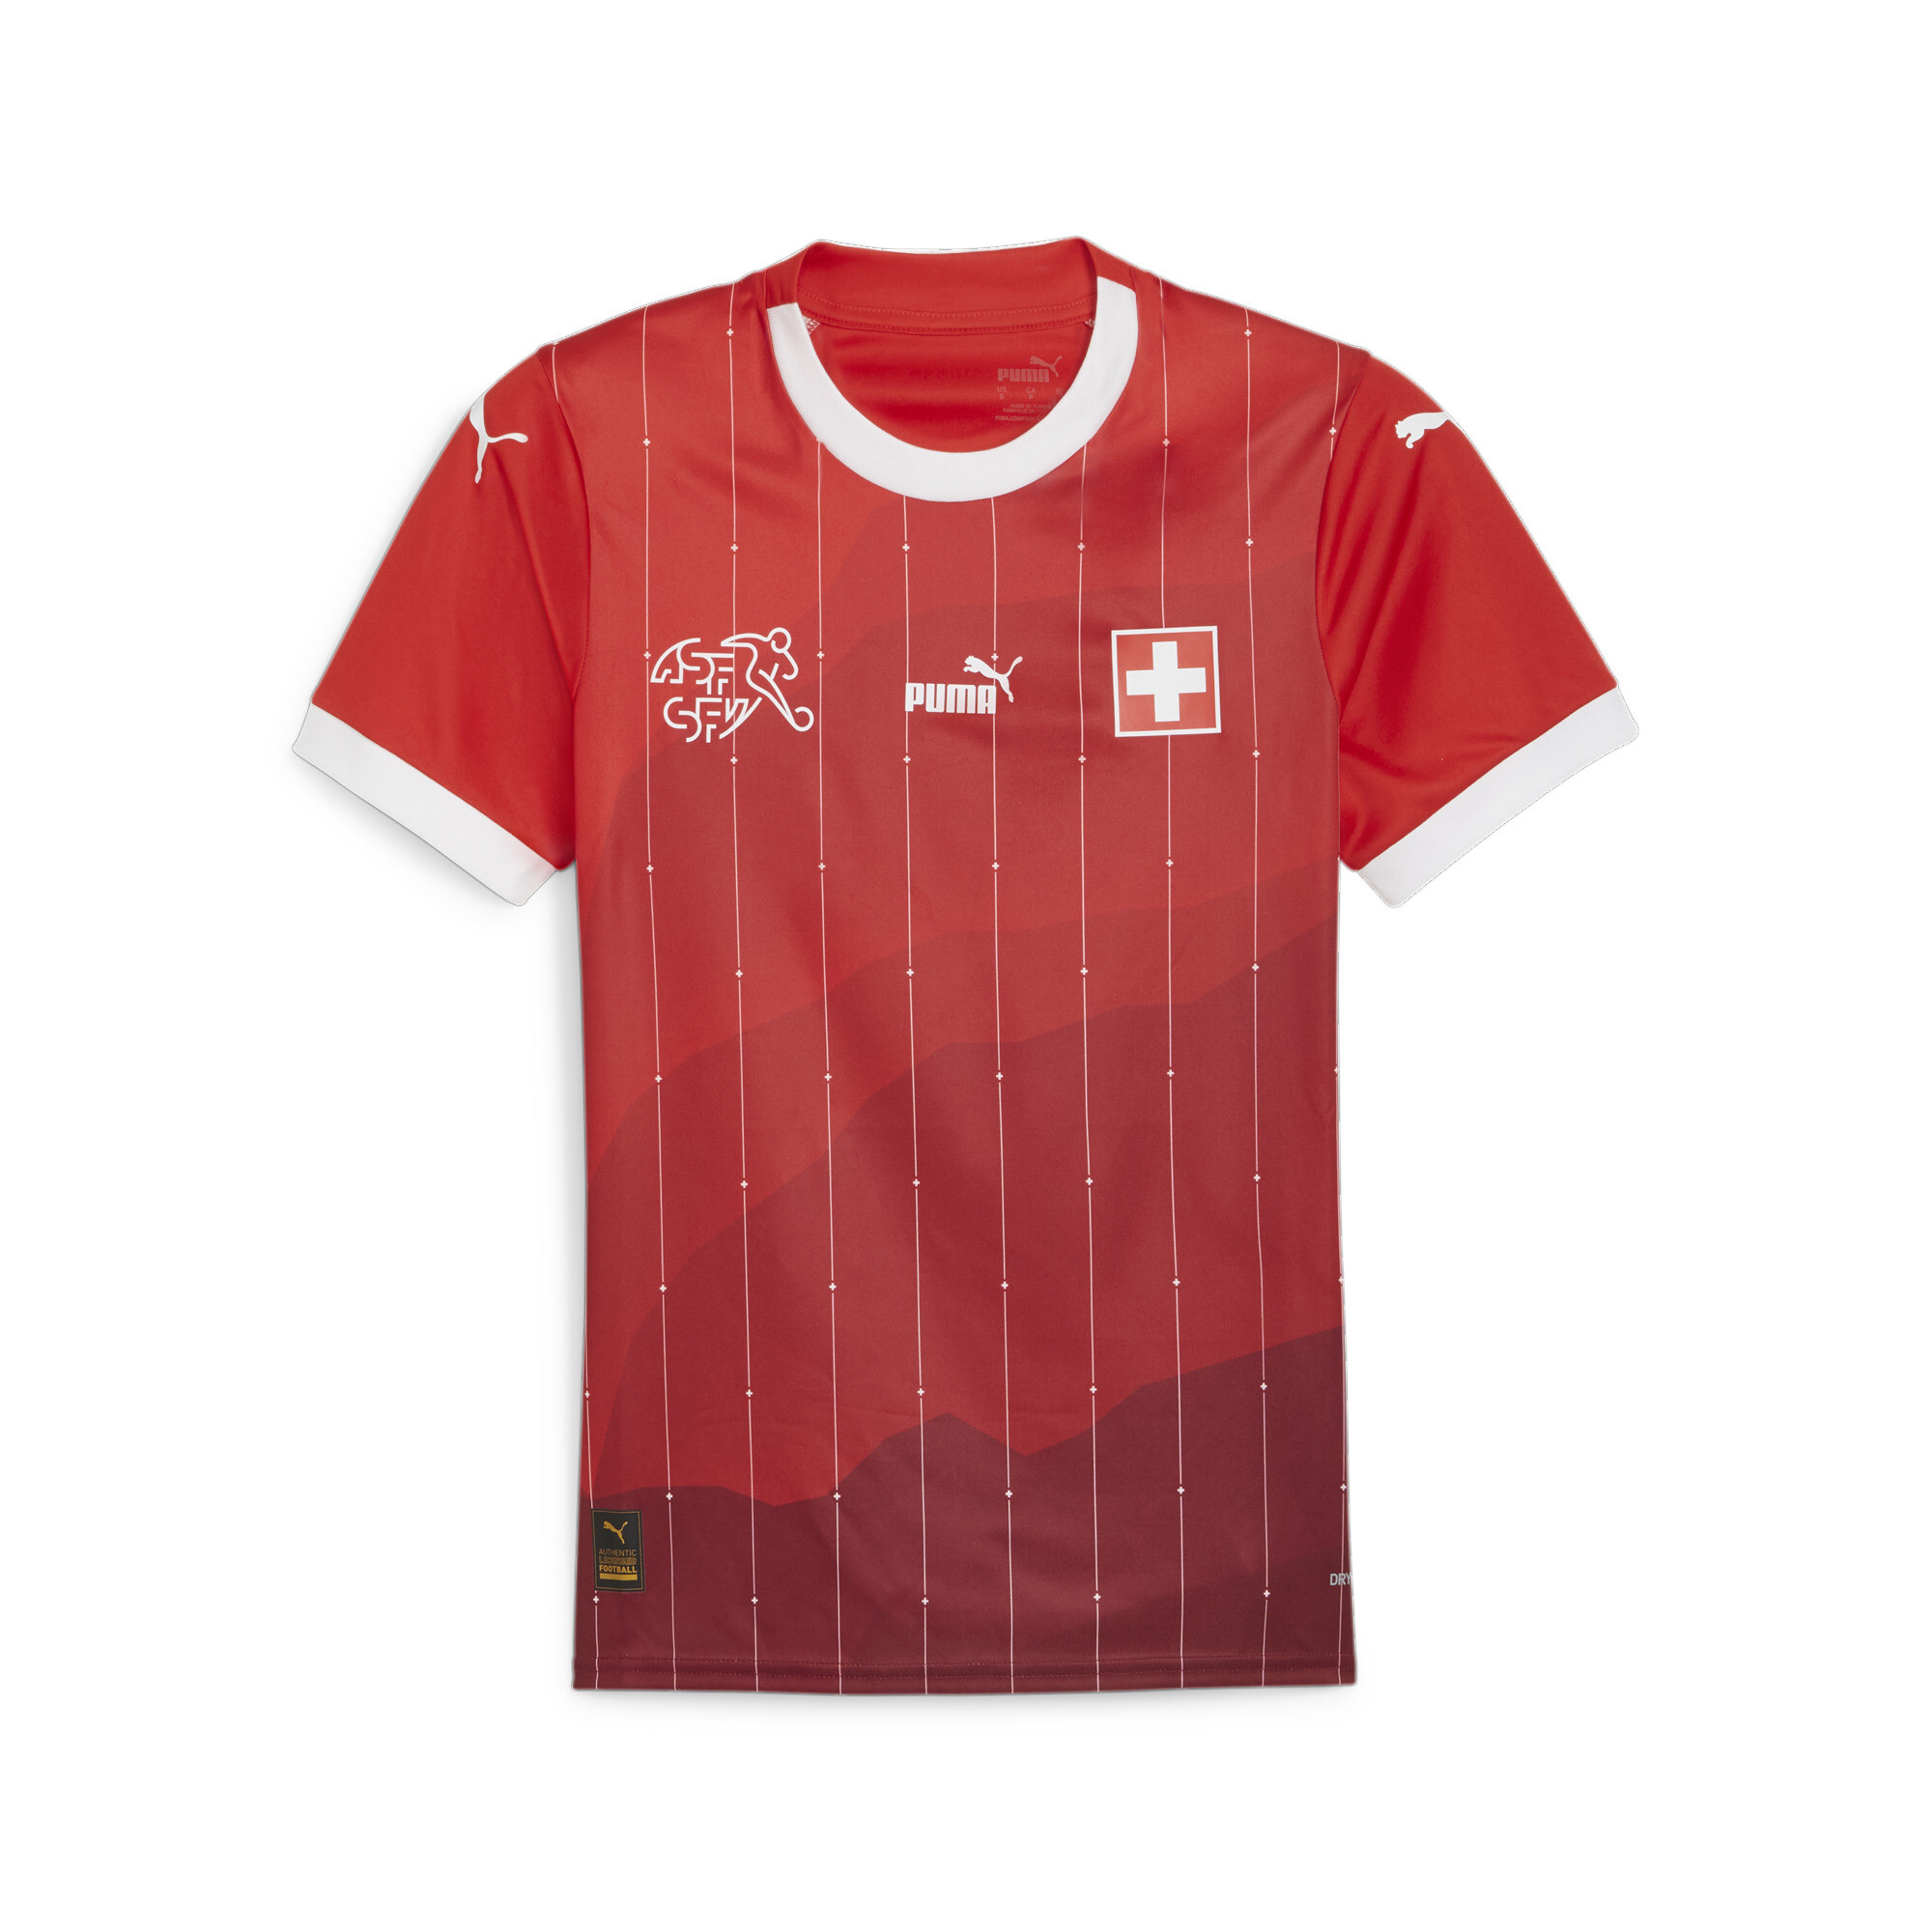 Women's PUMA Switzerland 23/24 World Cup Home Jersey In Red, Size Large